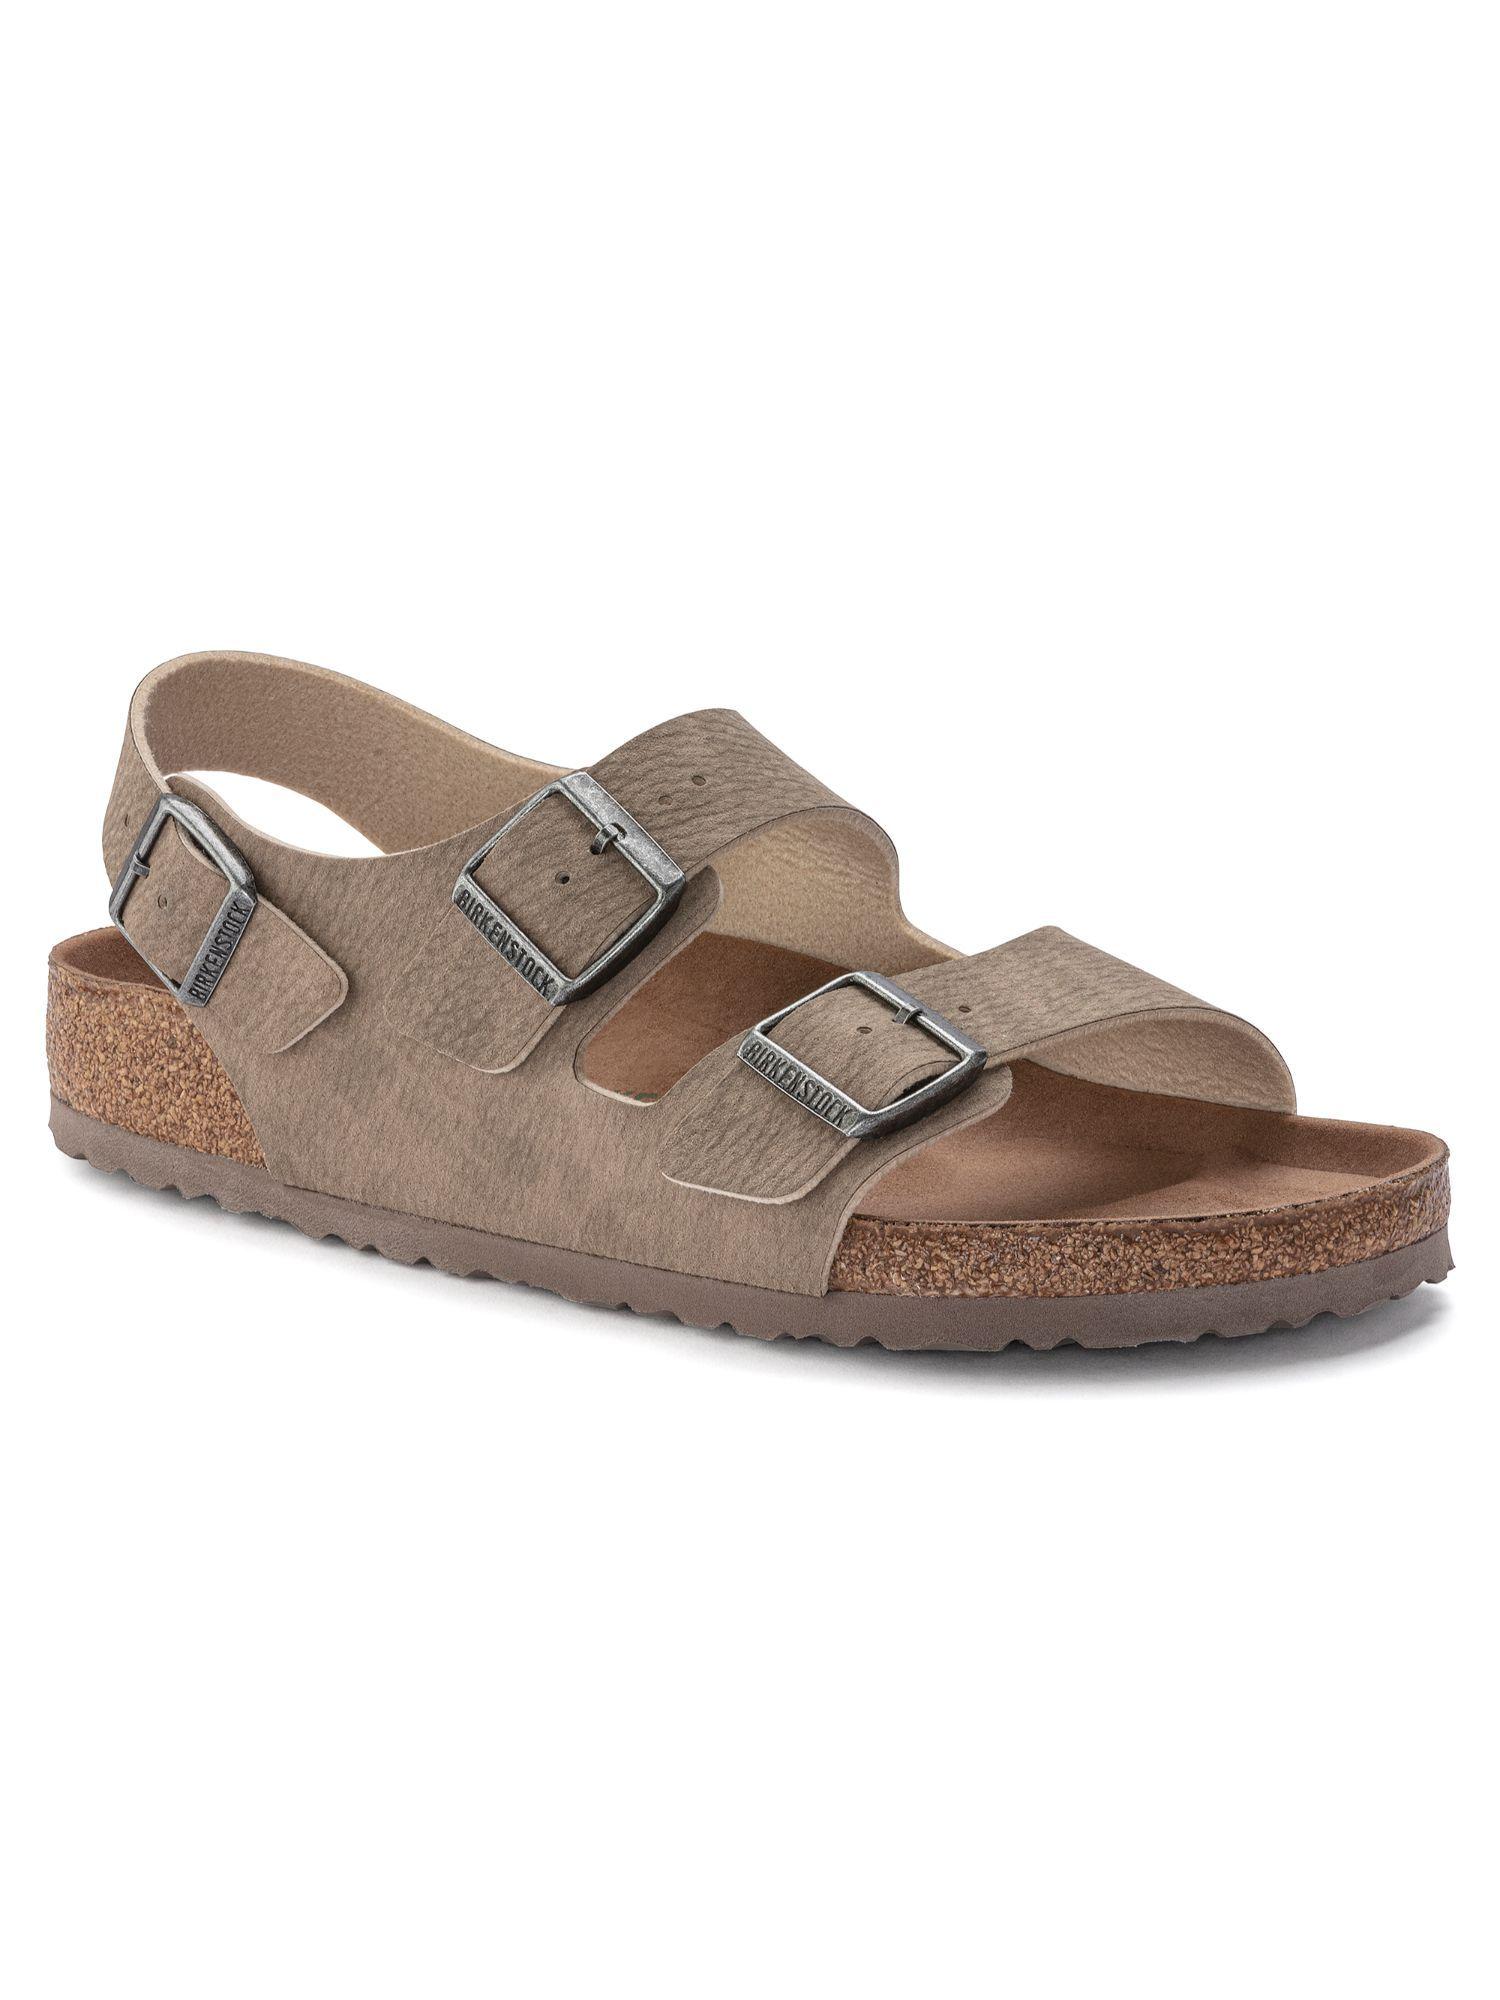 Milano Vegan Desert Dust Gray Taupe Regular Width Sandals With An Ankle Strap